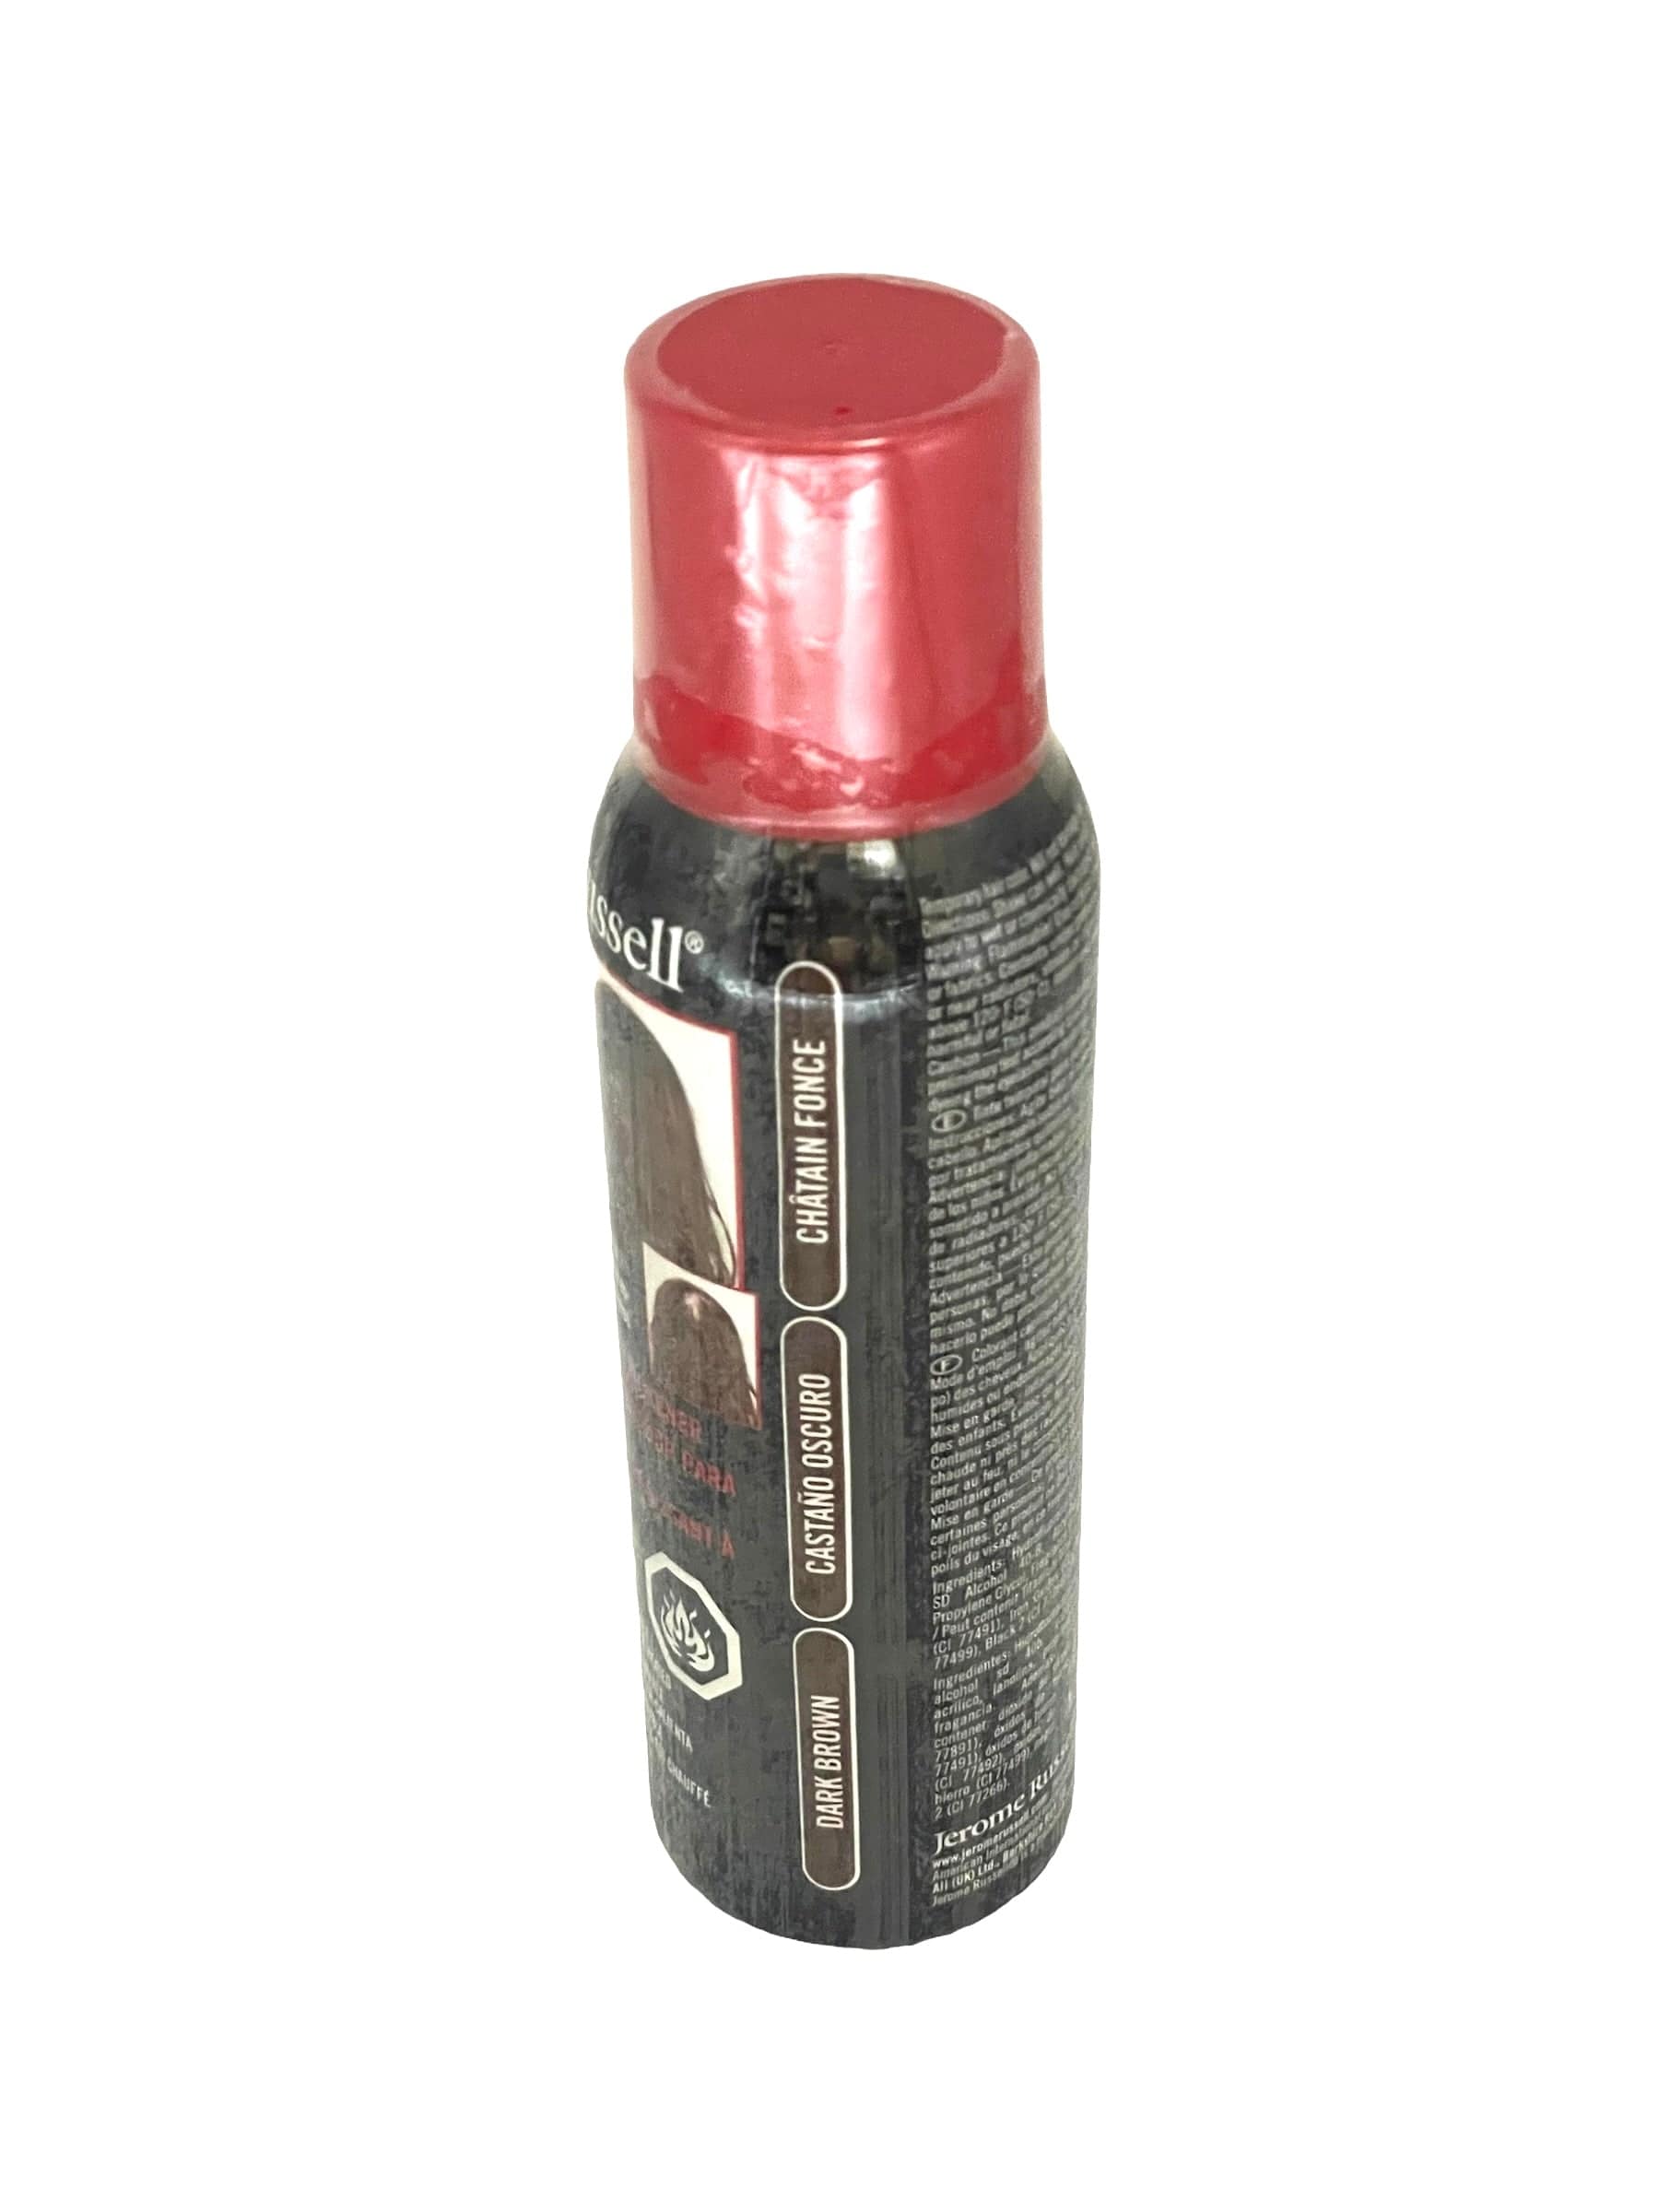 Root Touch Up Jerome Russell Spray & Hair Thickener 3.5oz Hair Color